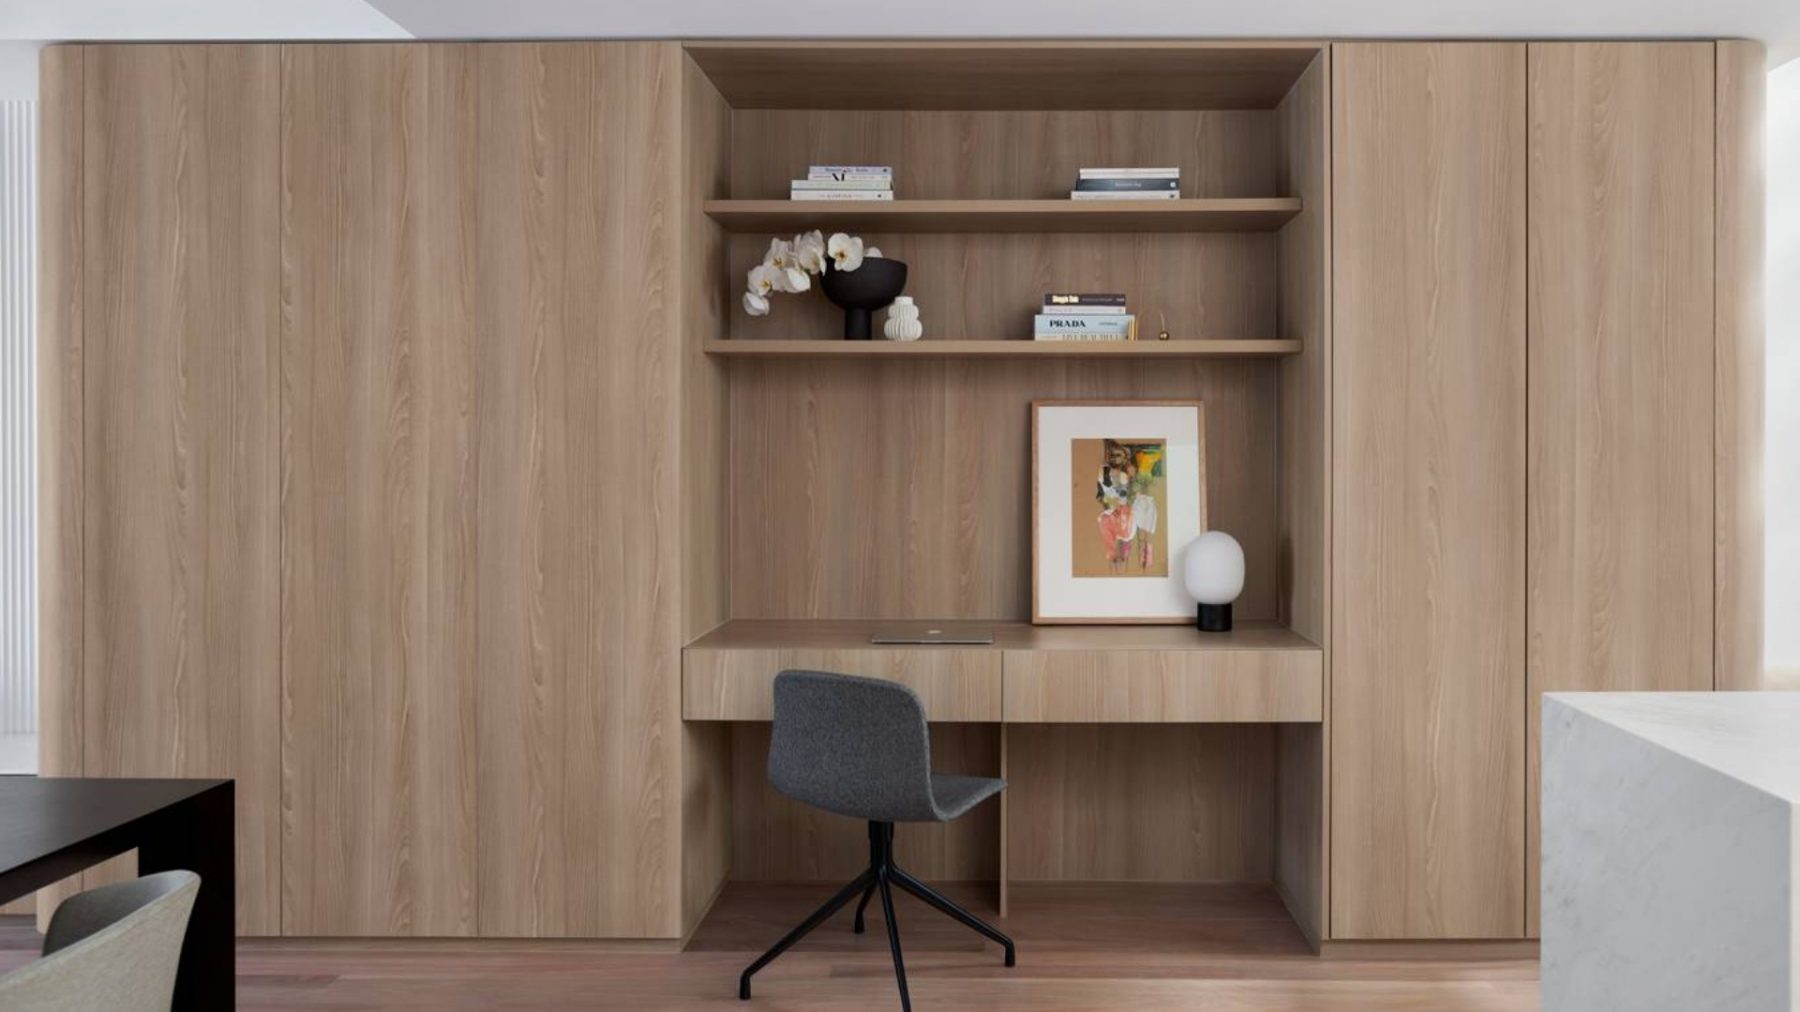 Just finished this custom-made home office for a customer in Sydney. Made from white Oak veneer.